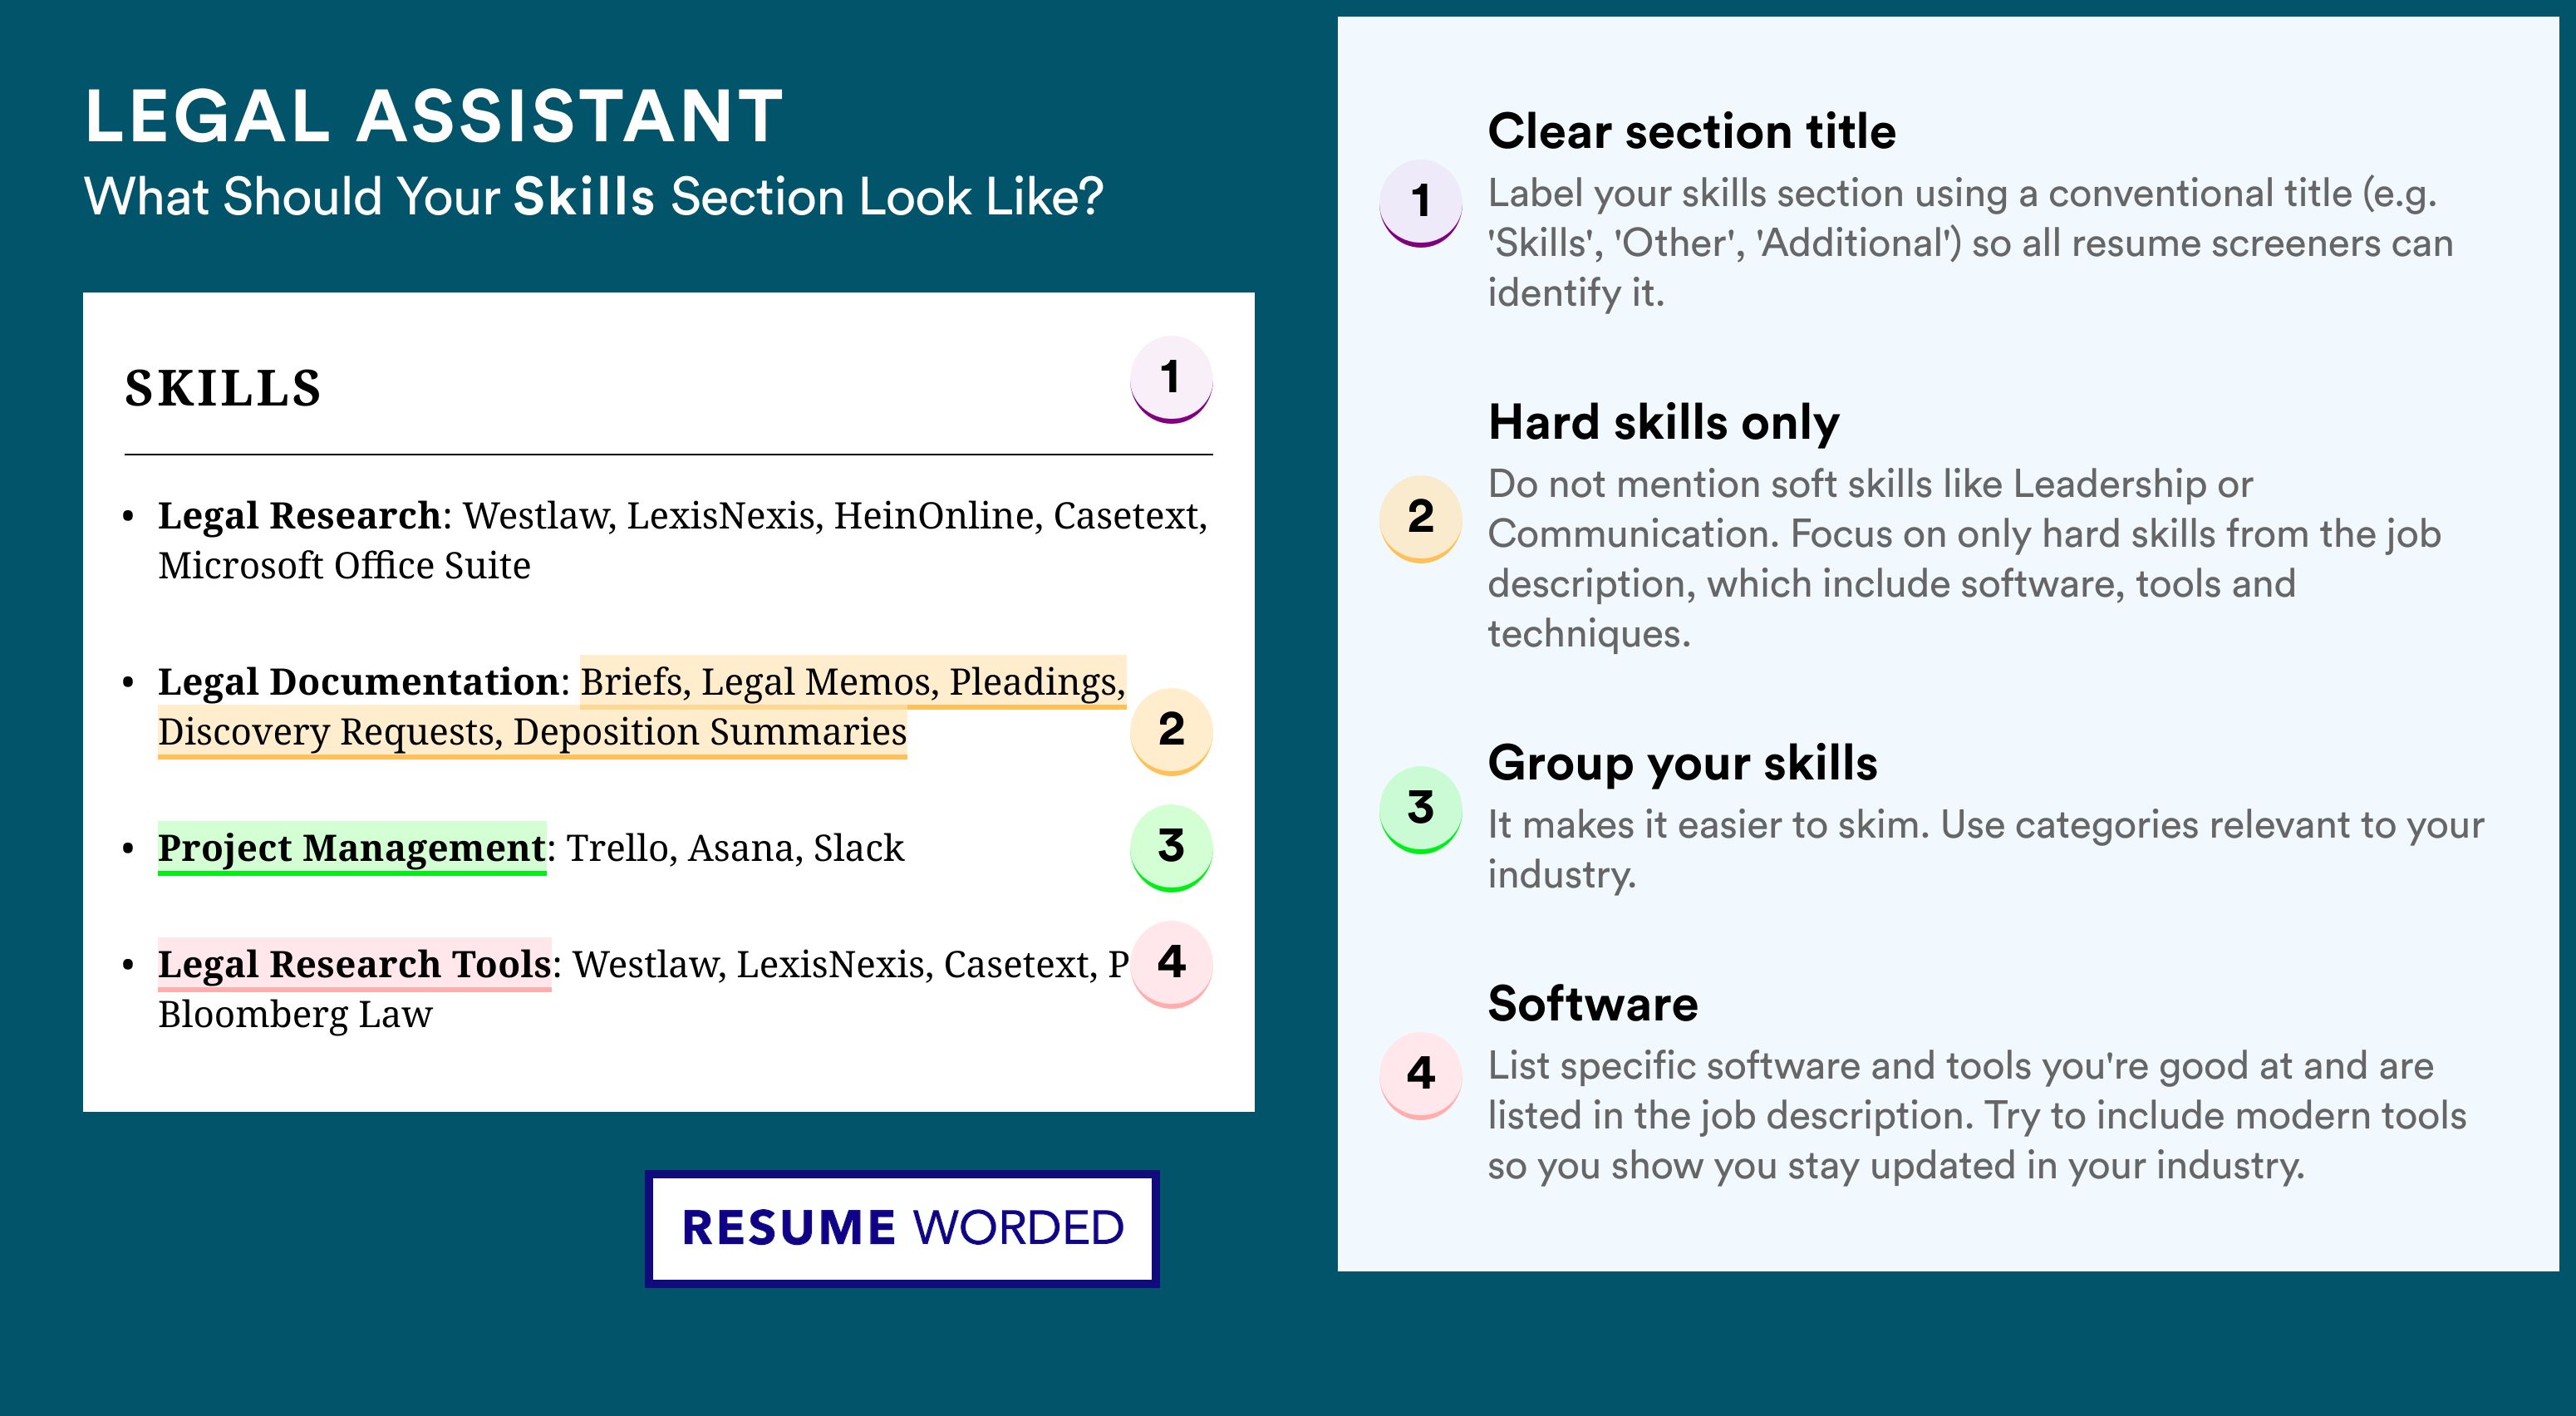 How To Write Your Skills Section - Legal Assistant Roles